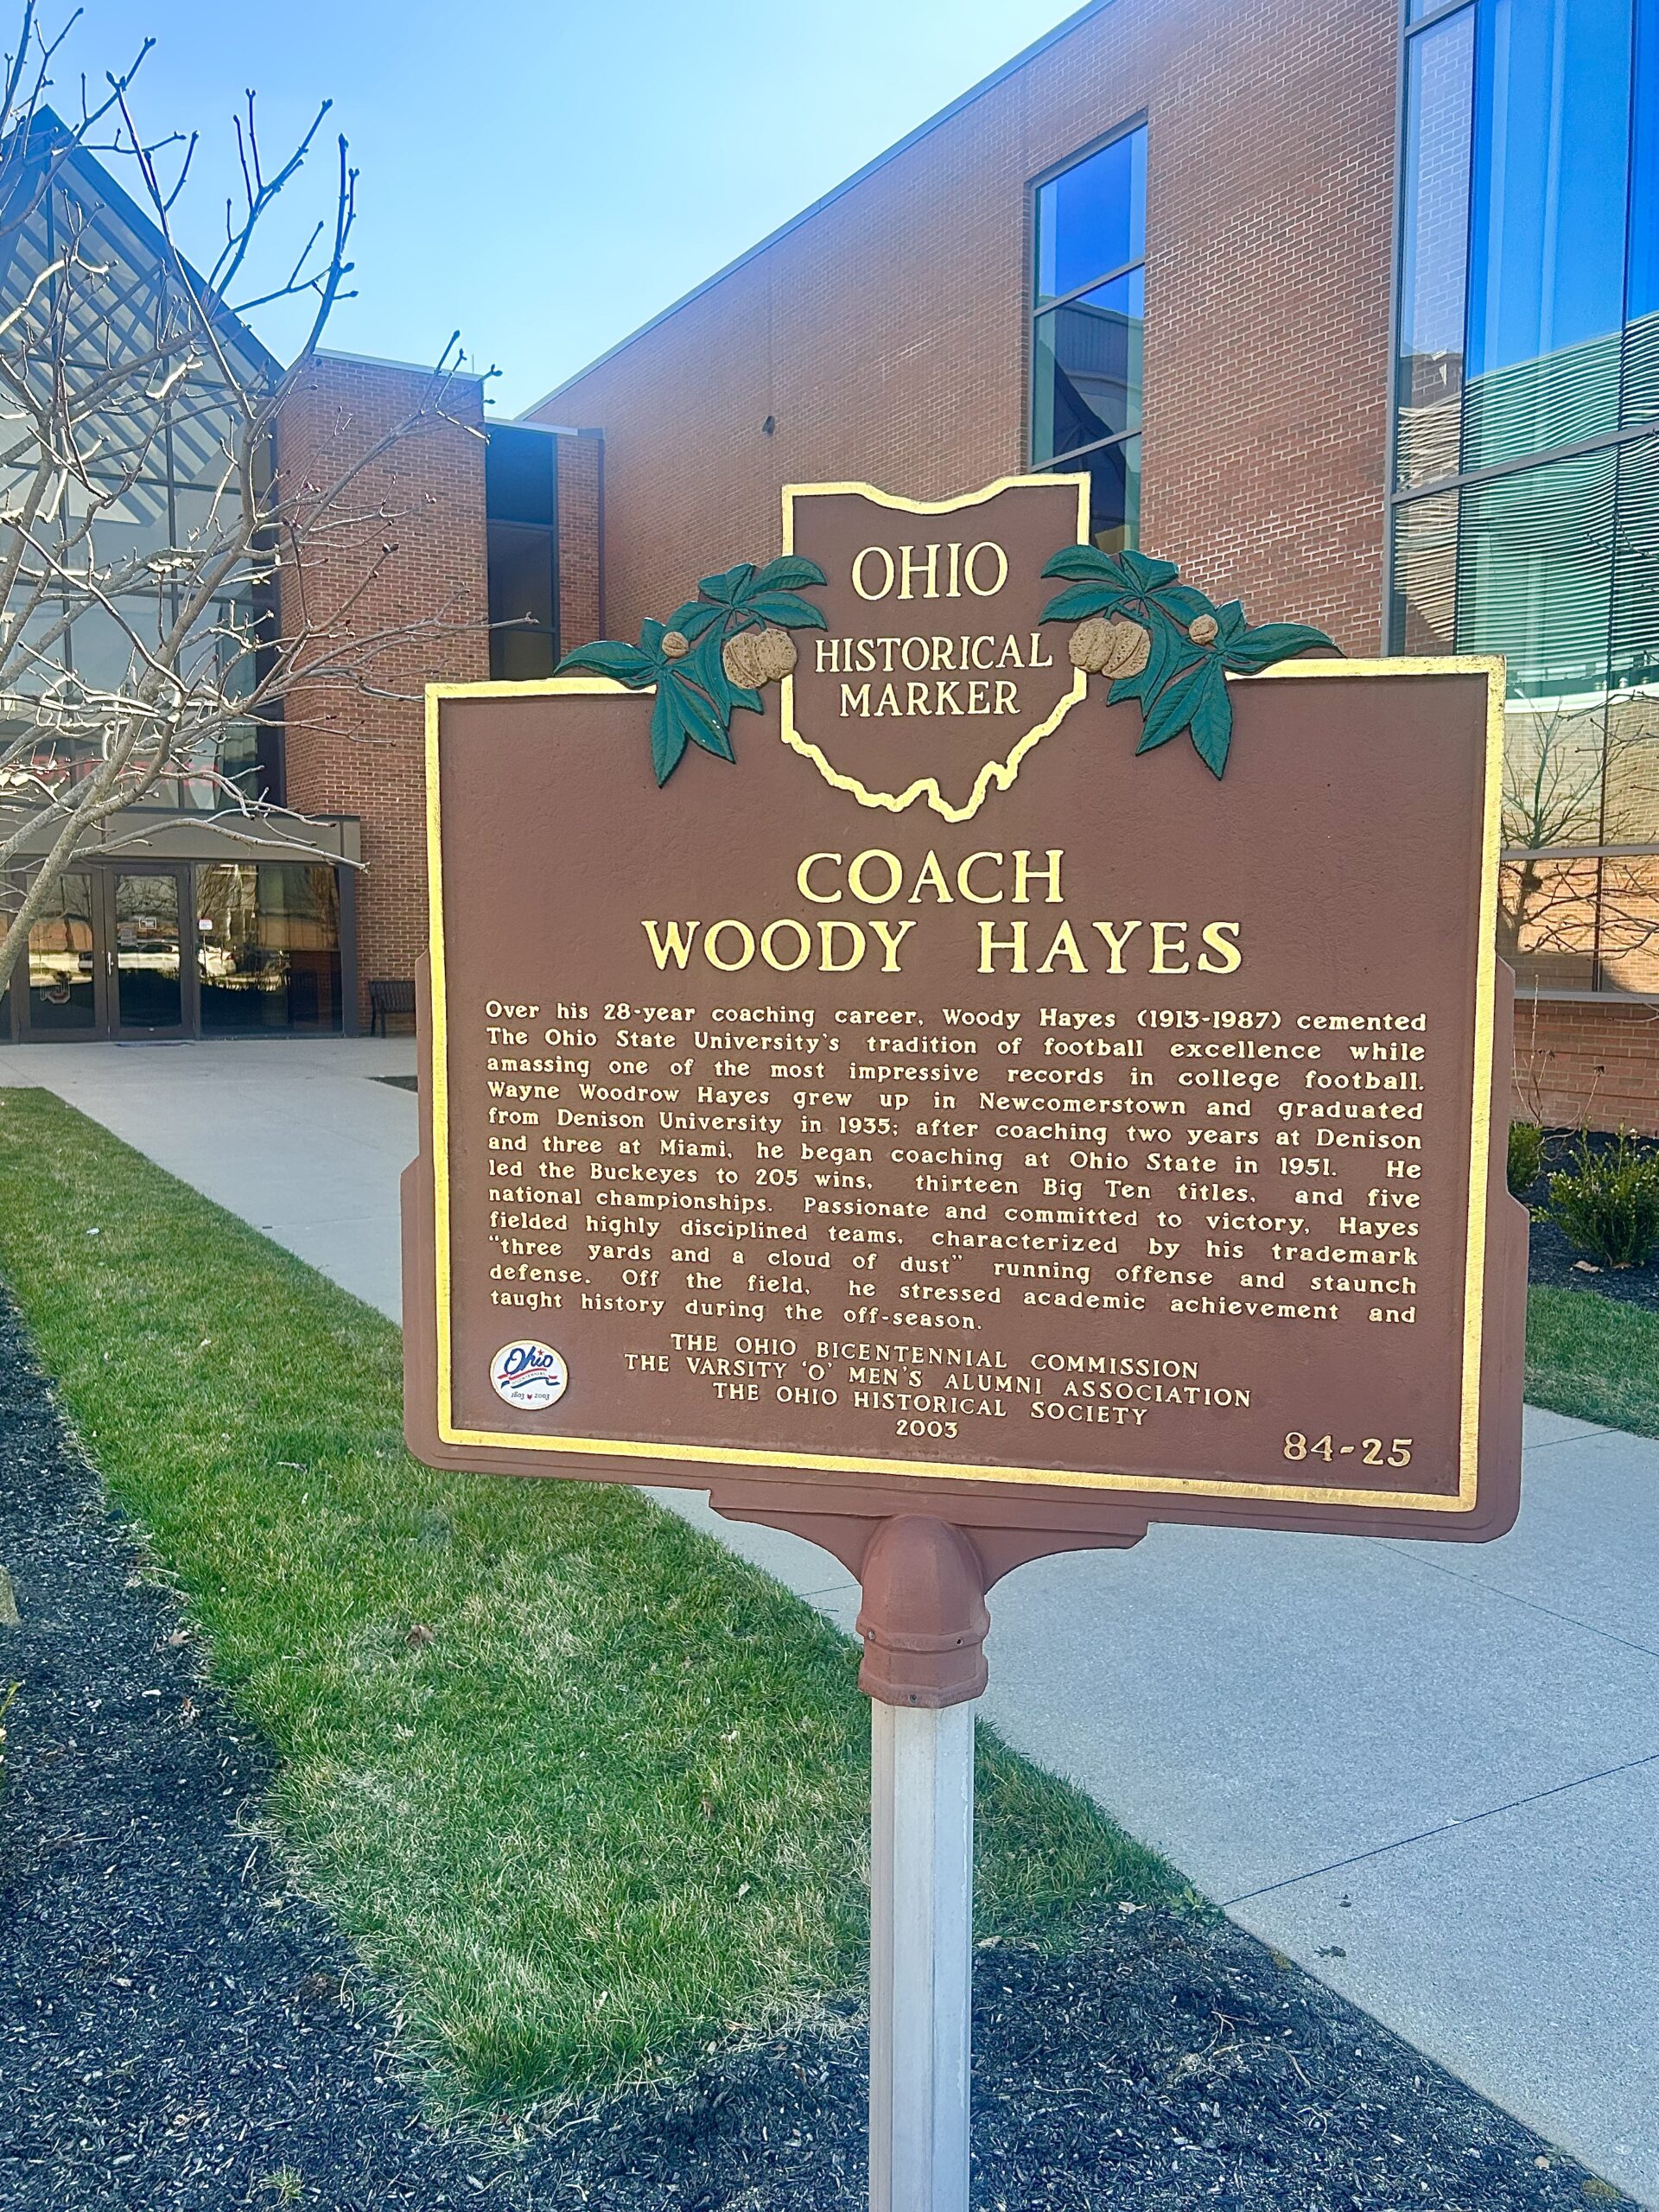 Ohio Historical Marker #84-25 Coach Woody Hayes || Sharon the Moments Blog